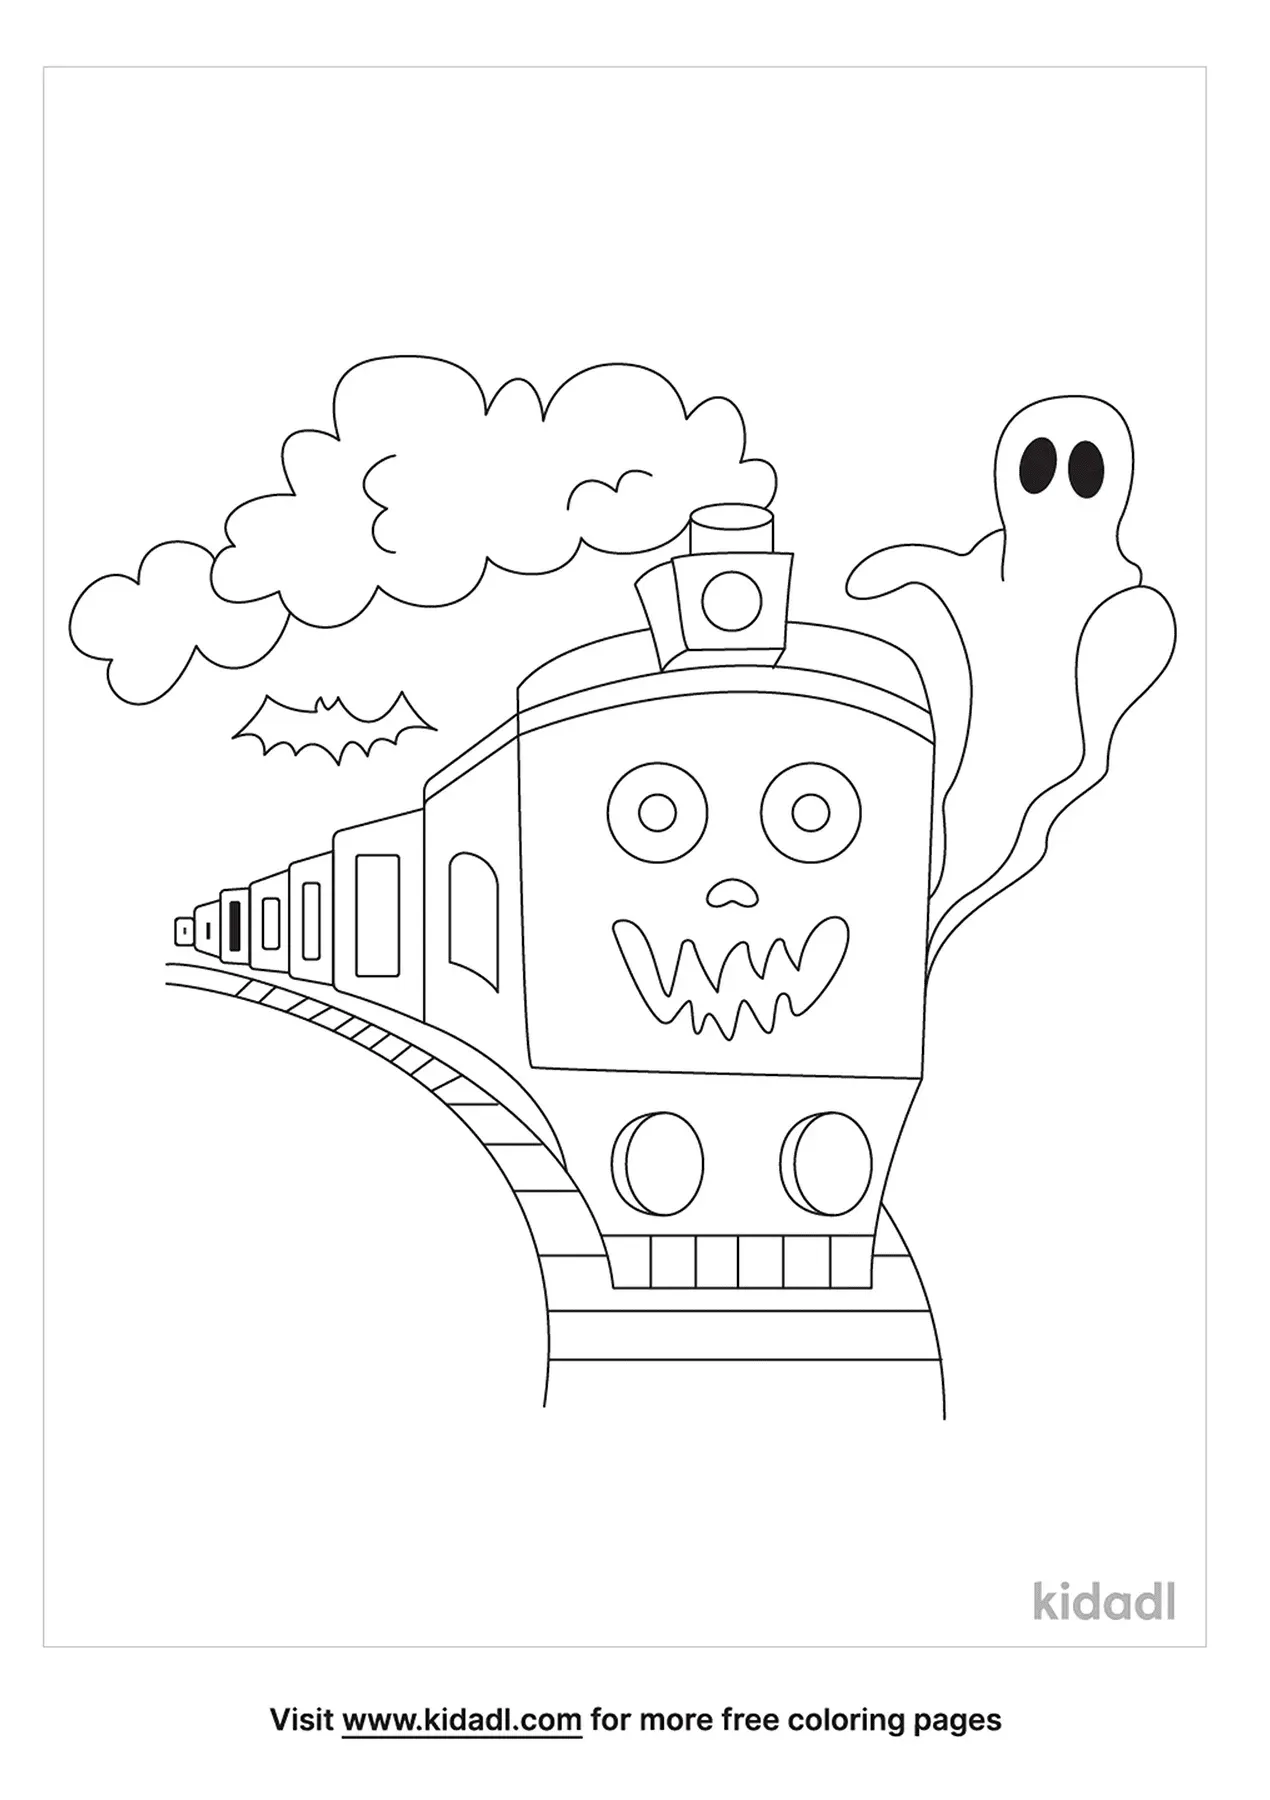 Free Ghost Train Coloring Page | Coloring Page Printables | Kidadl